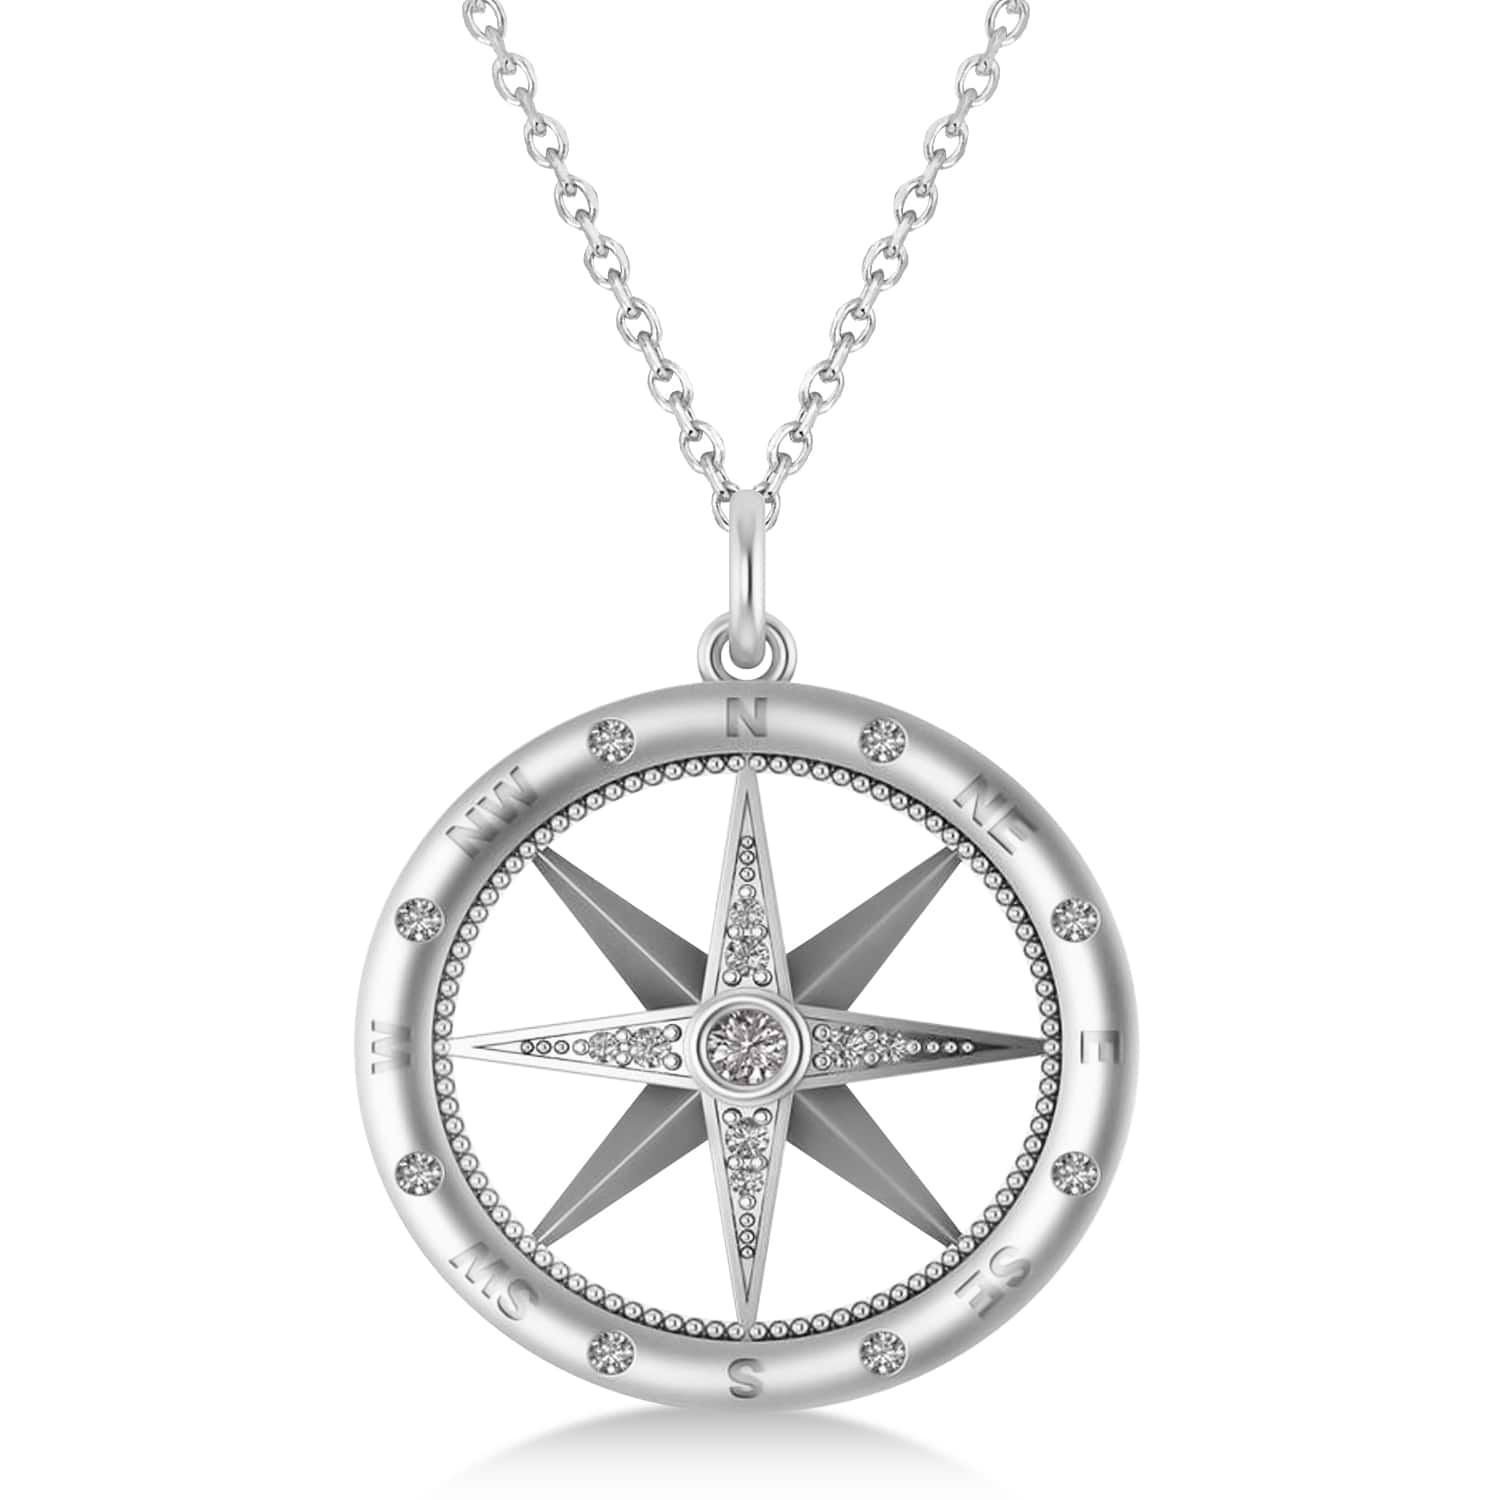 Large Compass Necklace Pendant For Men Diamond Accented 14k White Gold (0.38ct)